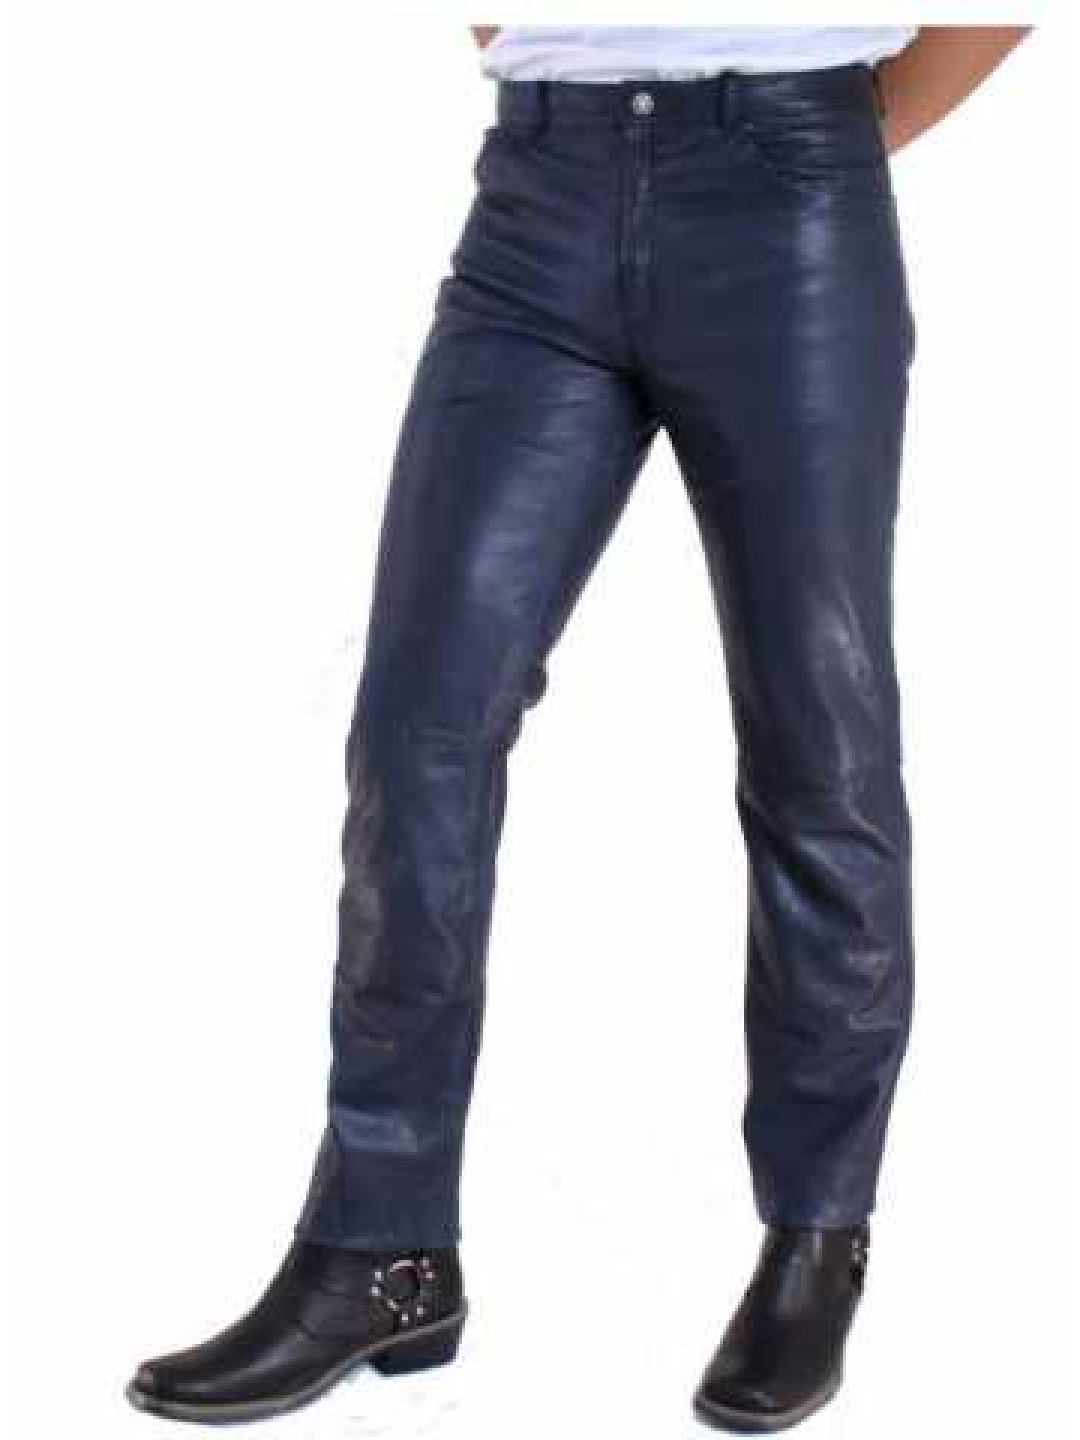 Imitation leather trousers - Black - Men | H&M IN